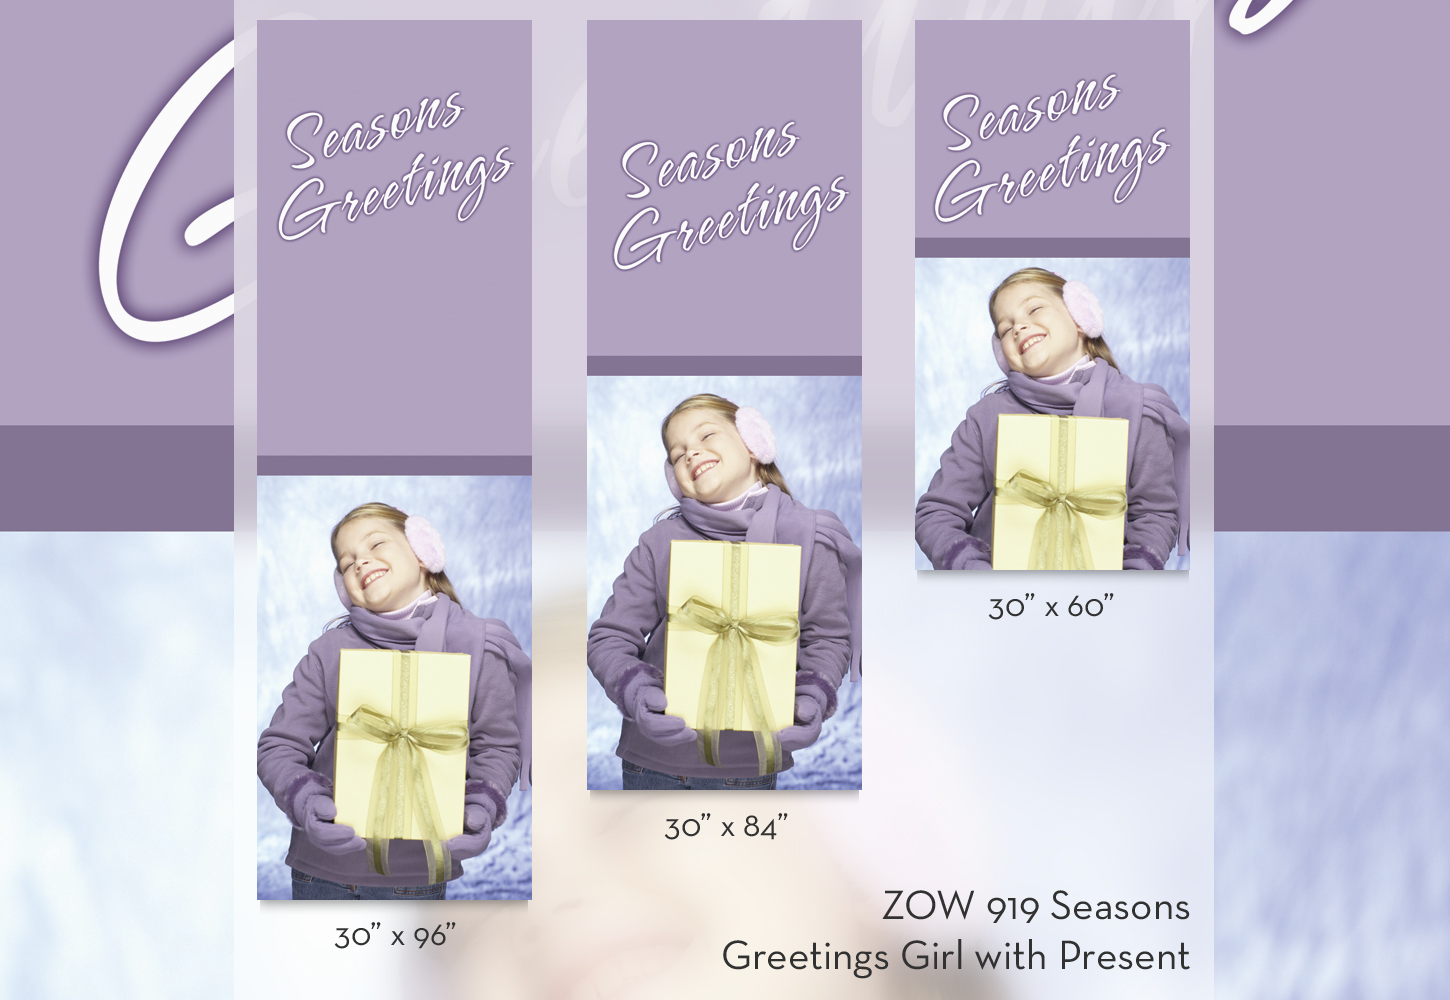 ZOW 919 Seasons Greetings Girl with Present